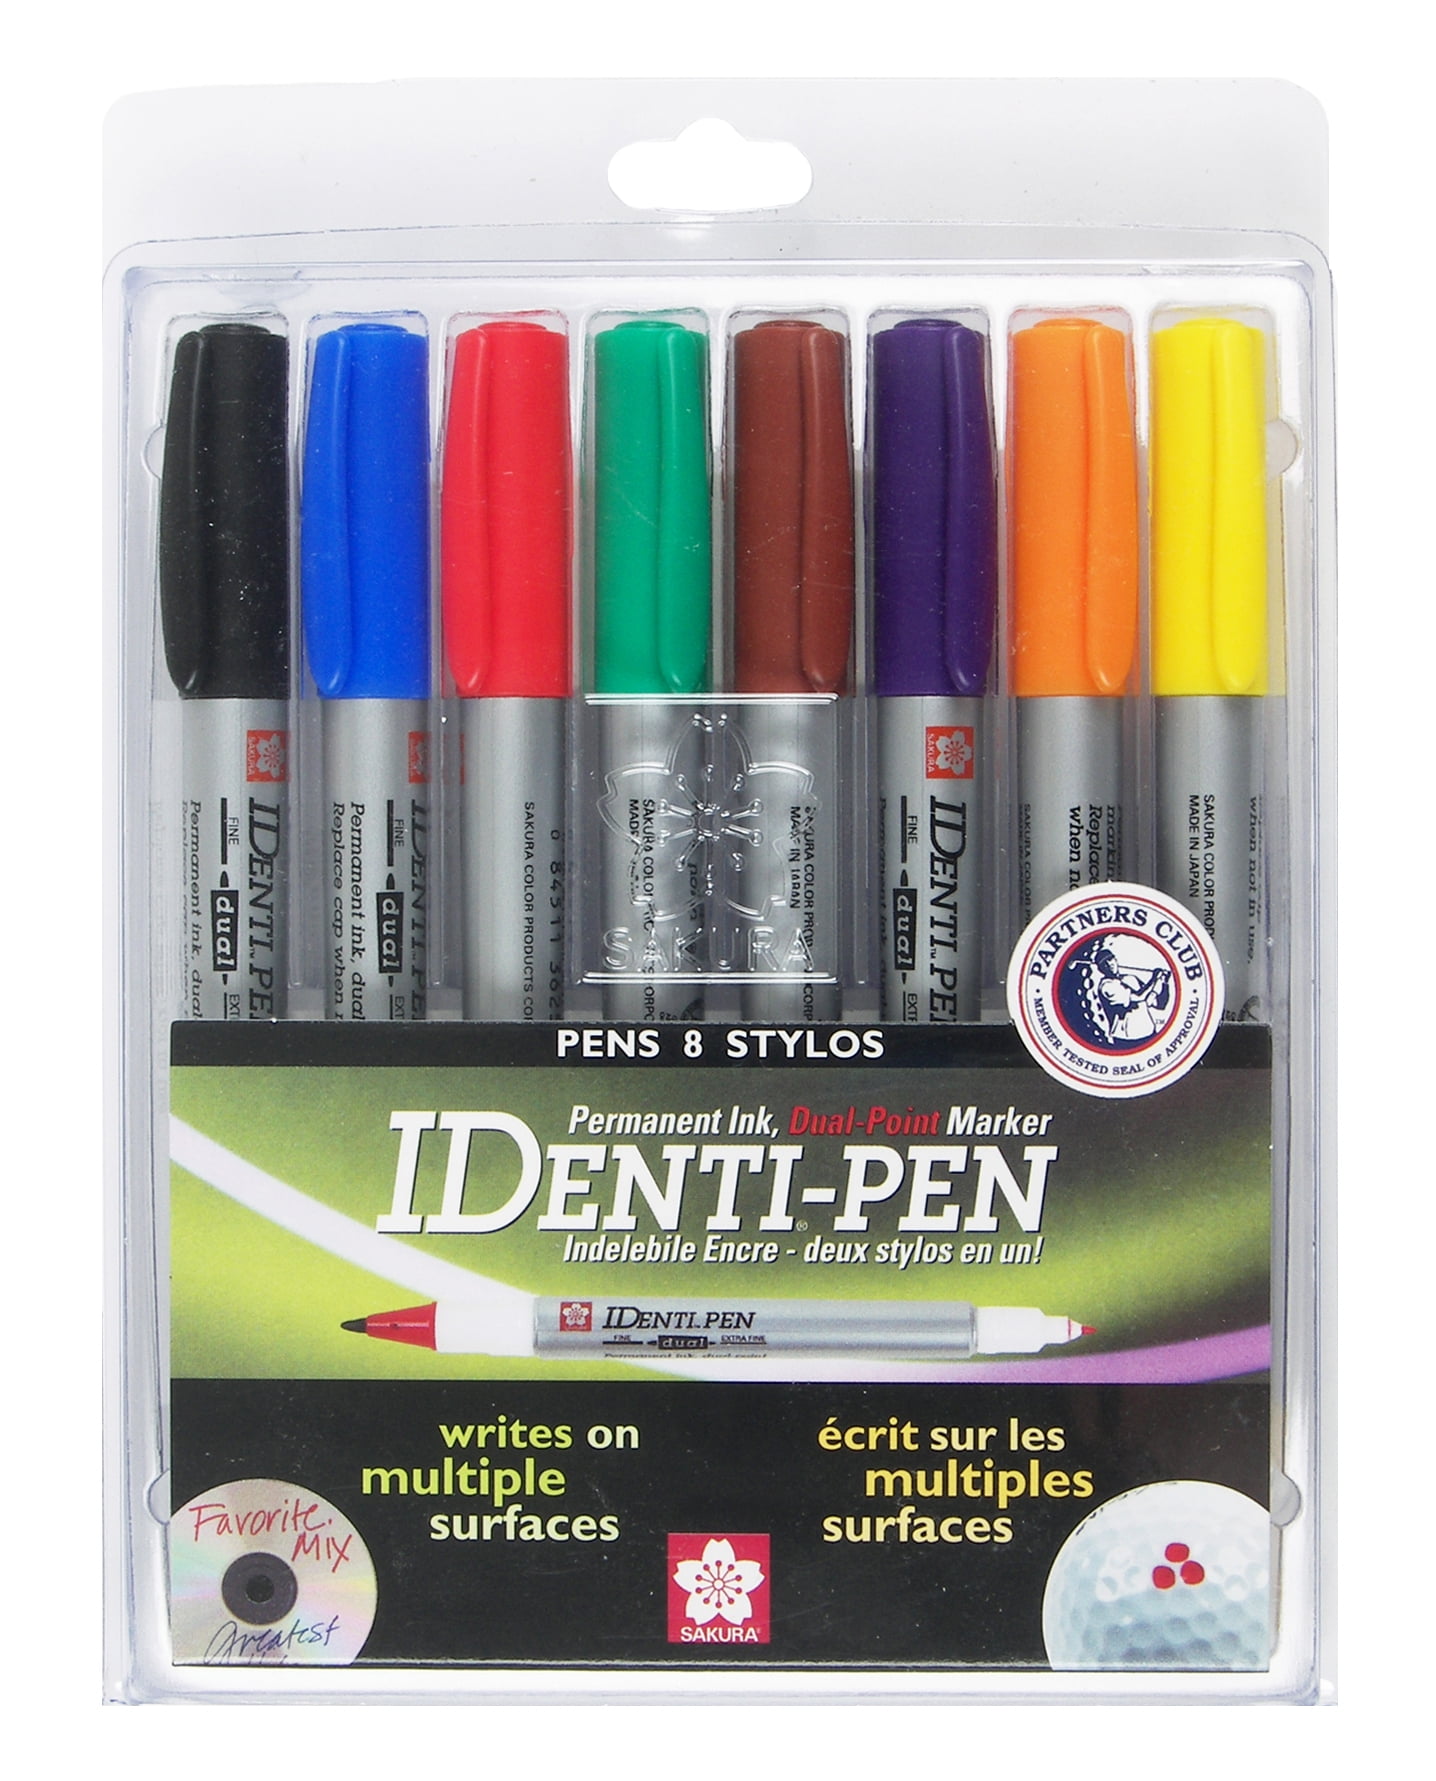 Permanent Paint Markers for Tires, Warehousing, Art, & Other Uses